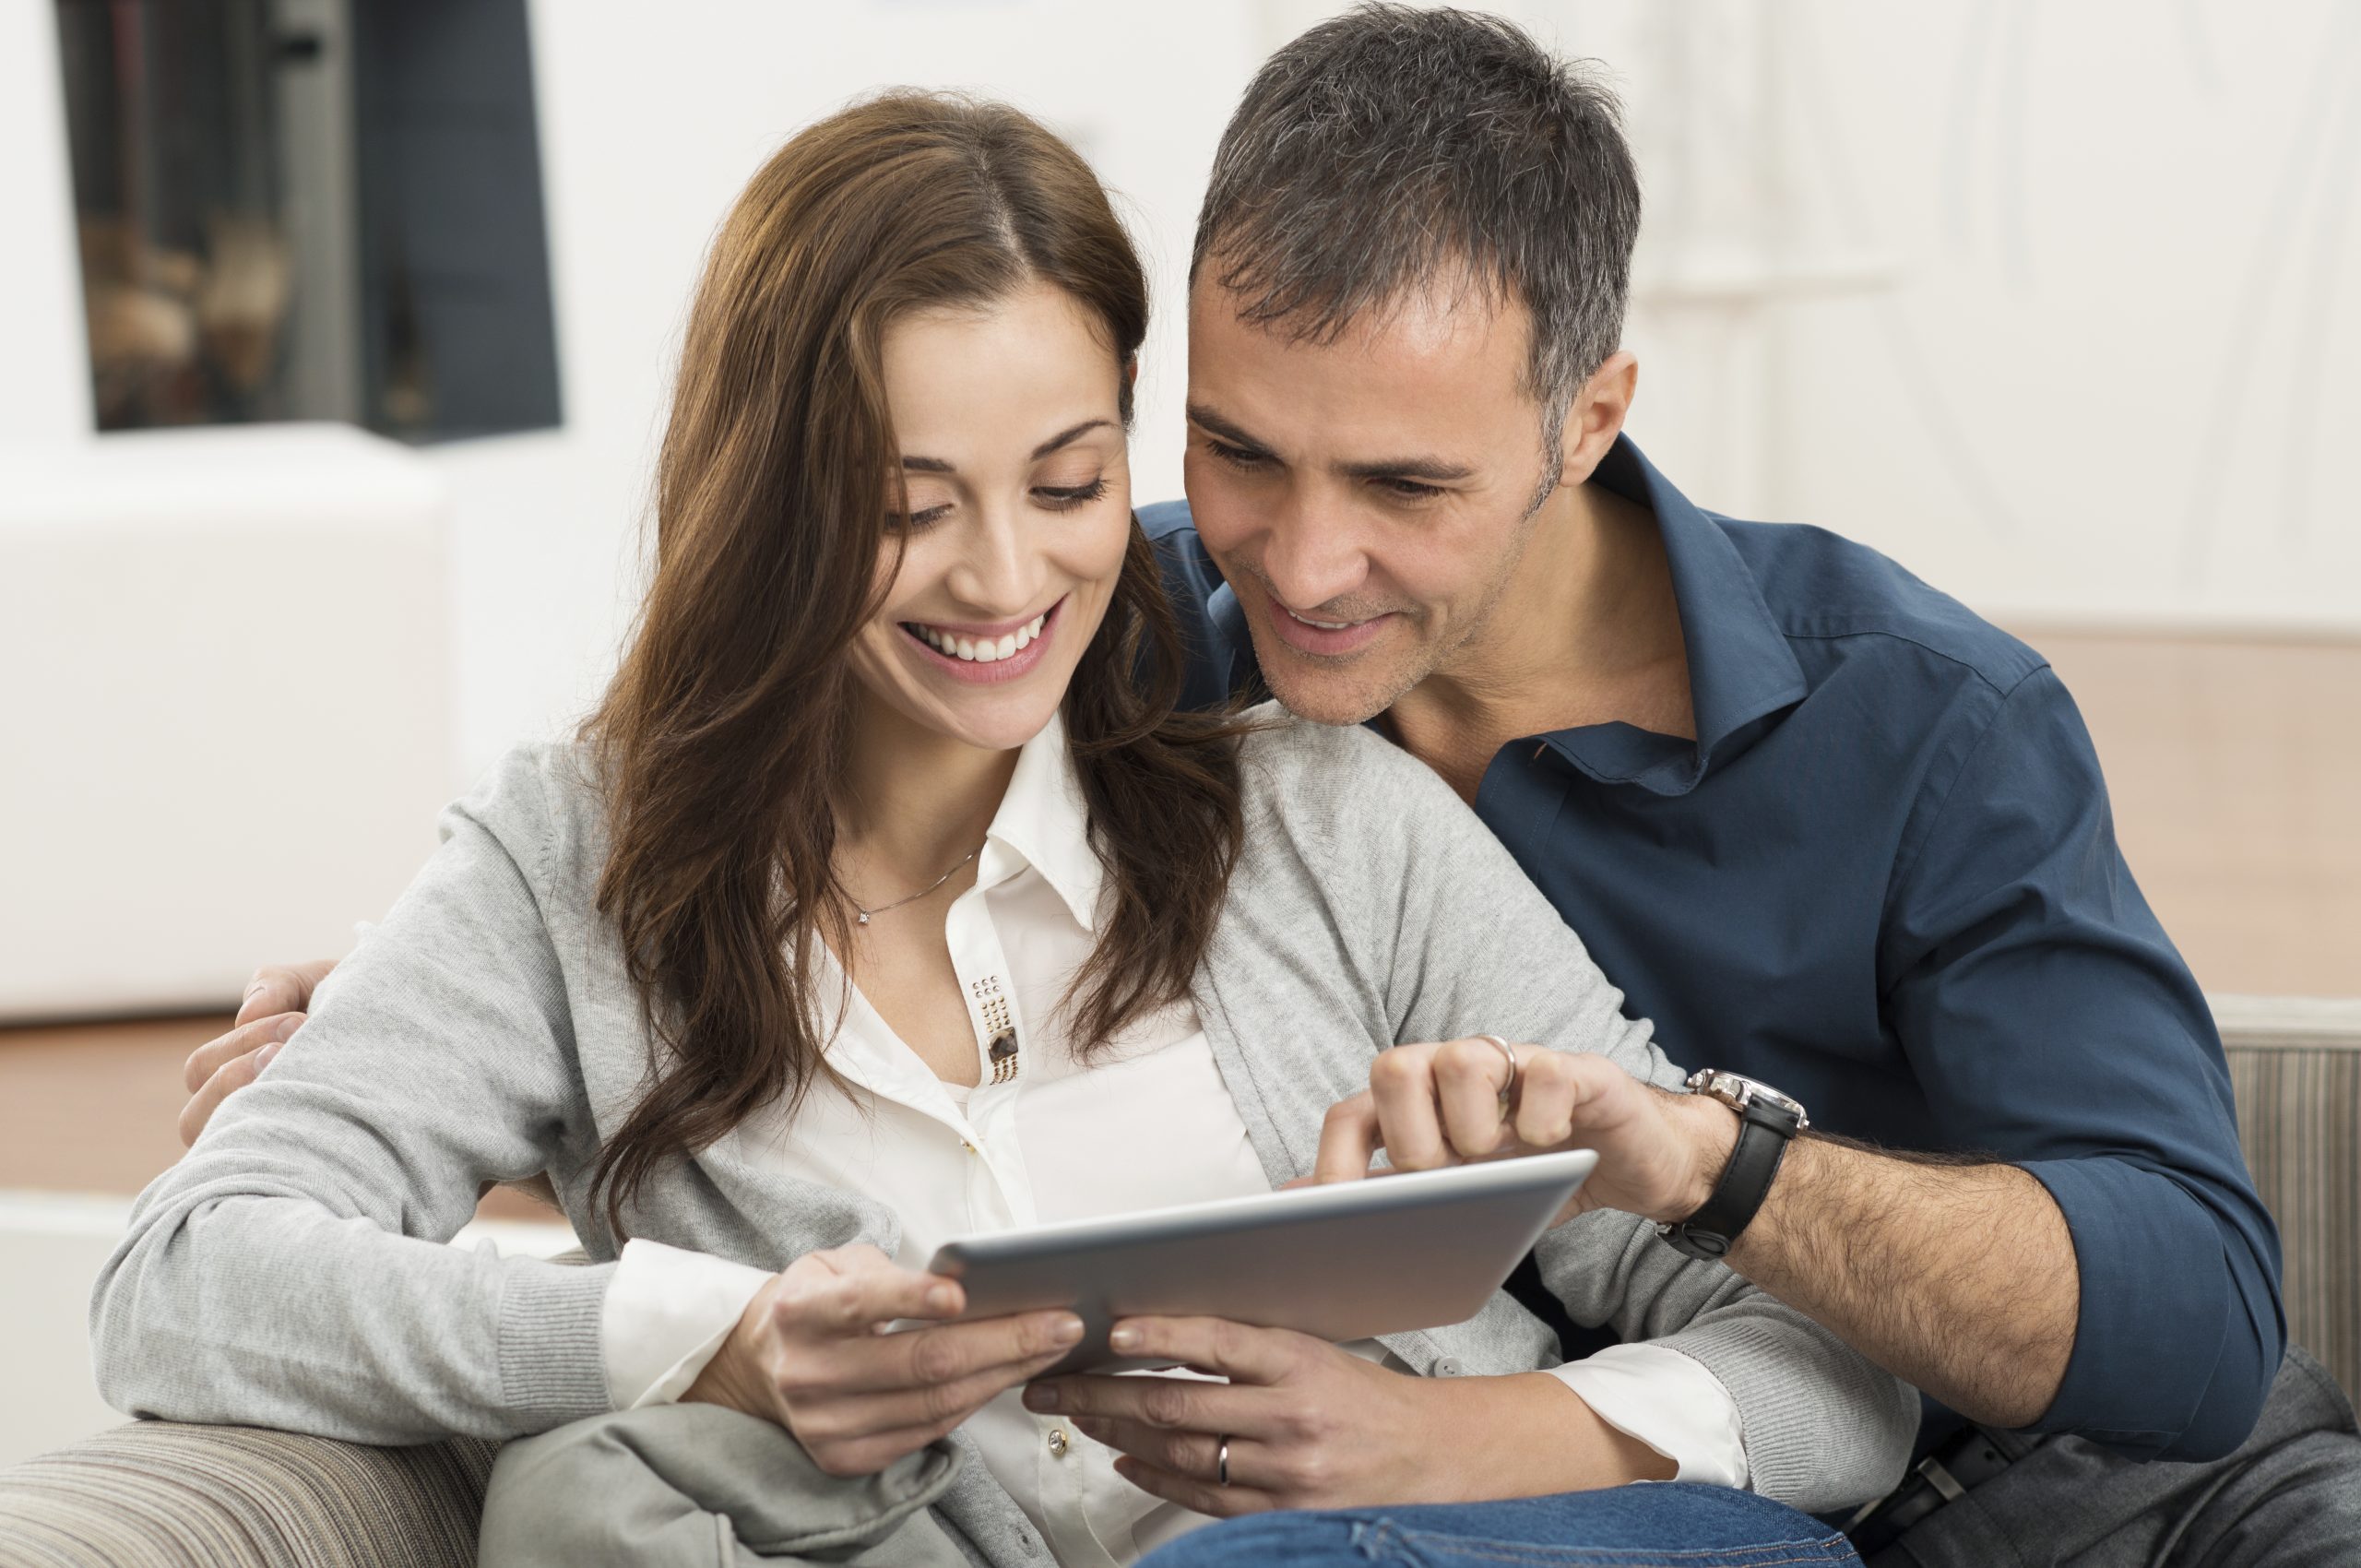 Young couple looking at a tablet together